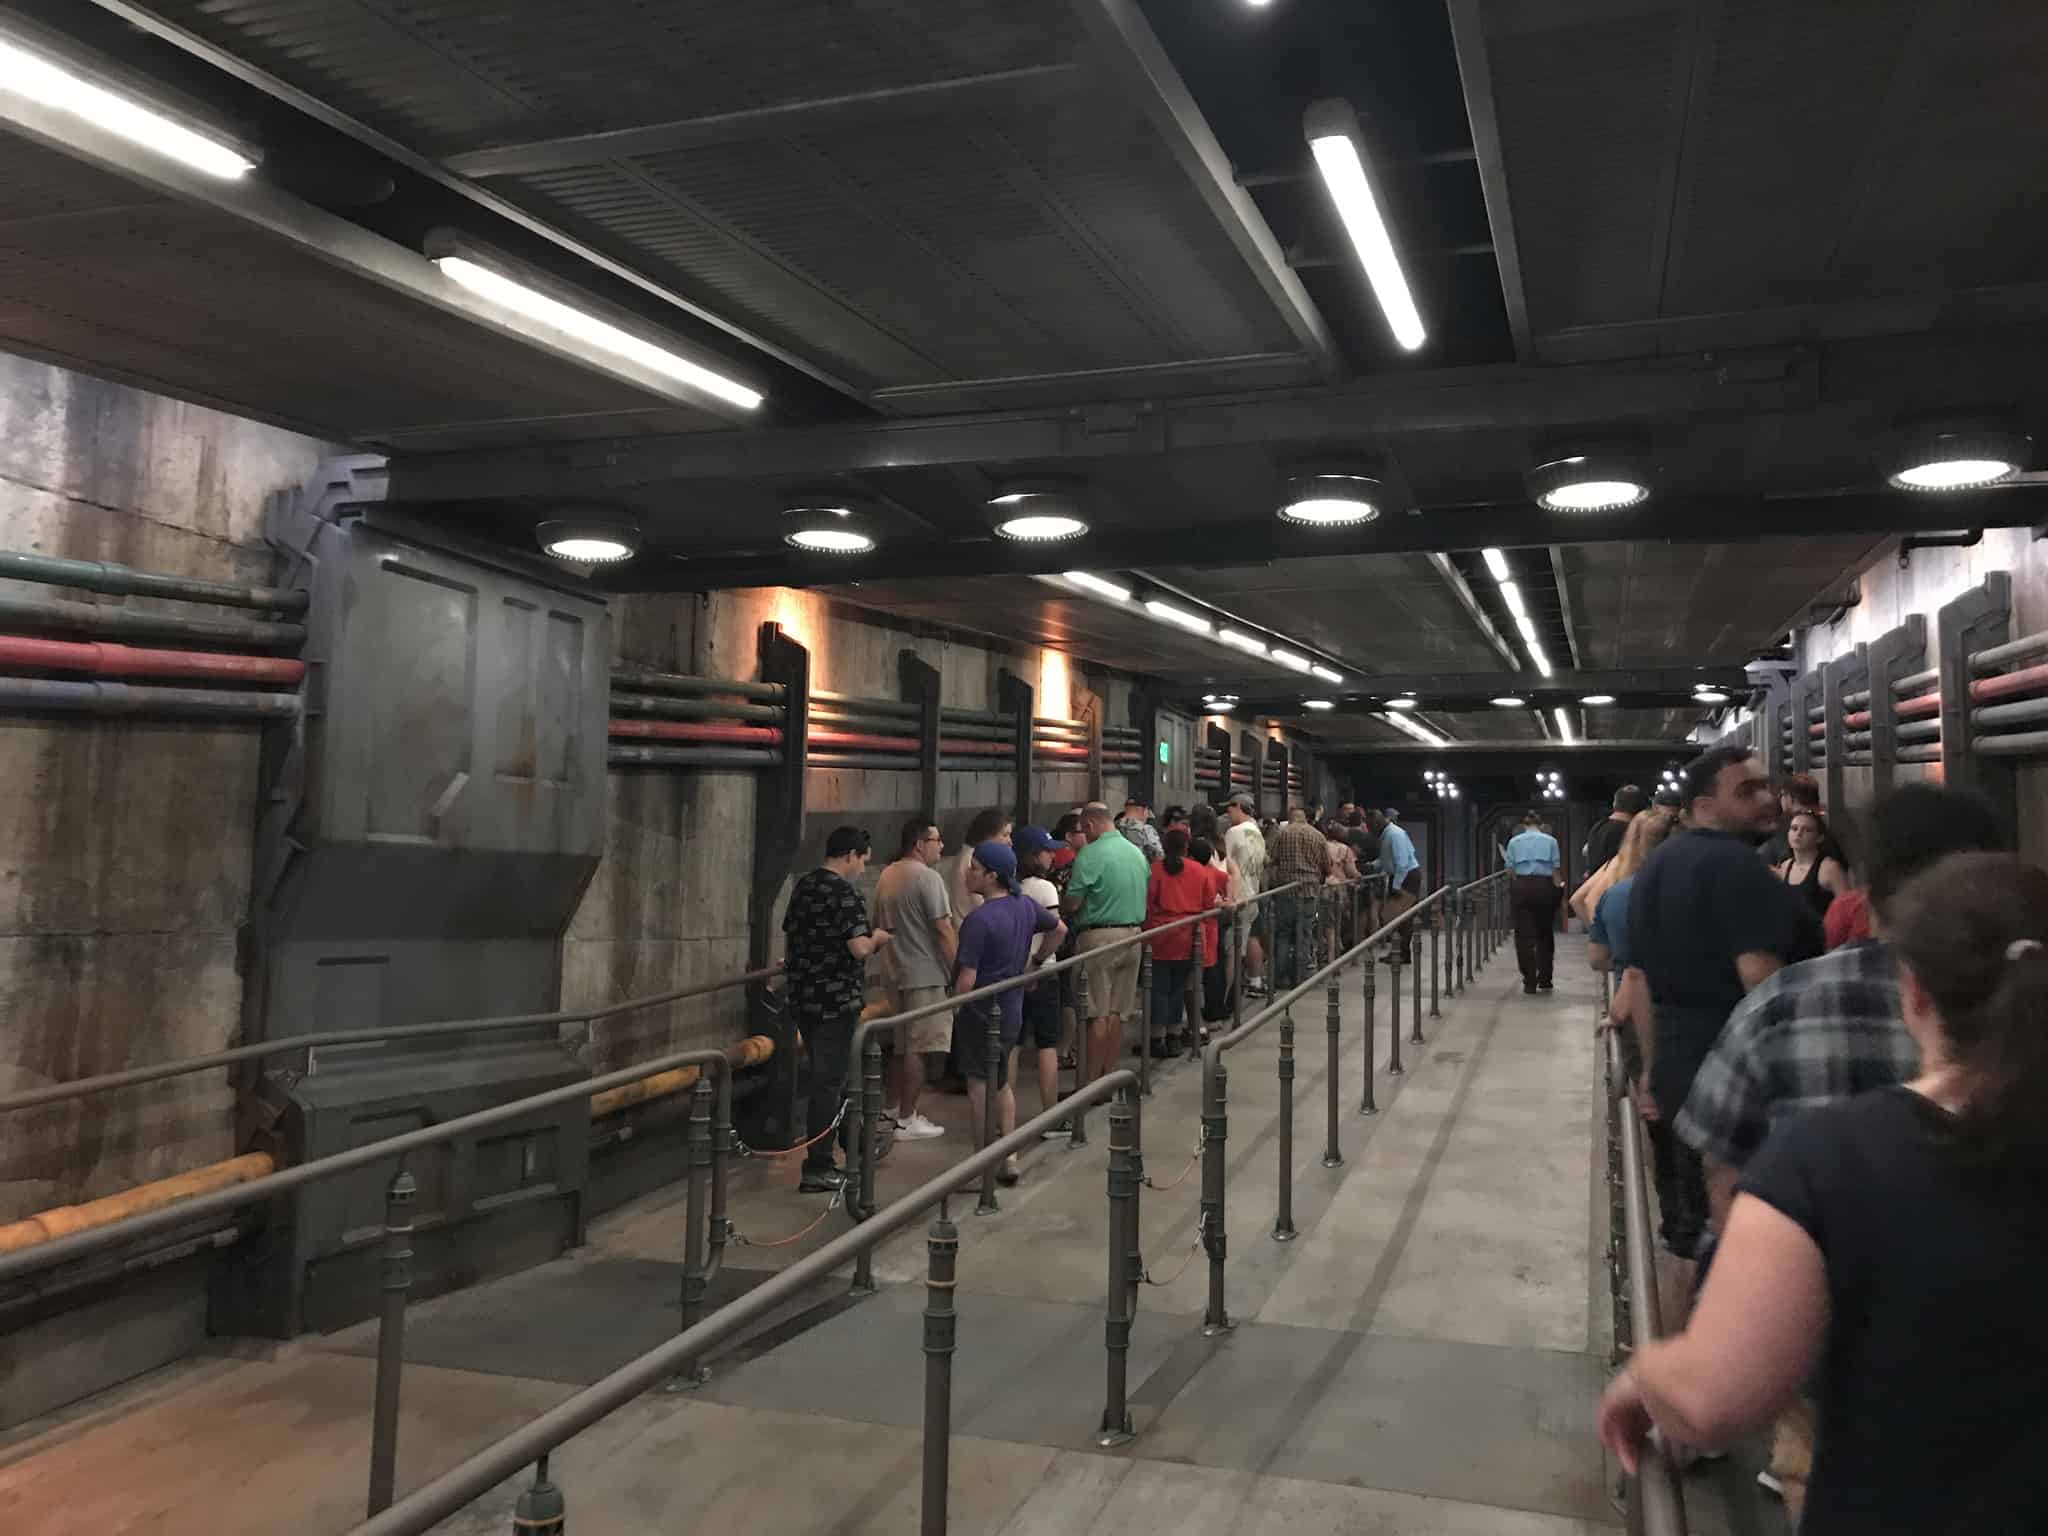 PHOTOS, VIDEO, REVIEW: Flight of Passage is the Next Big Theme Park Thrill Ride, Soars in Pandora - The World of AVATAR at Disney's Animal Kingdom